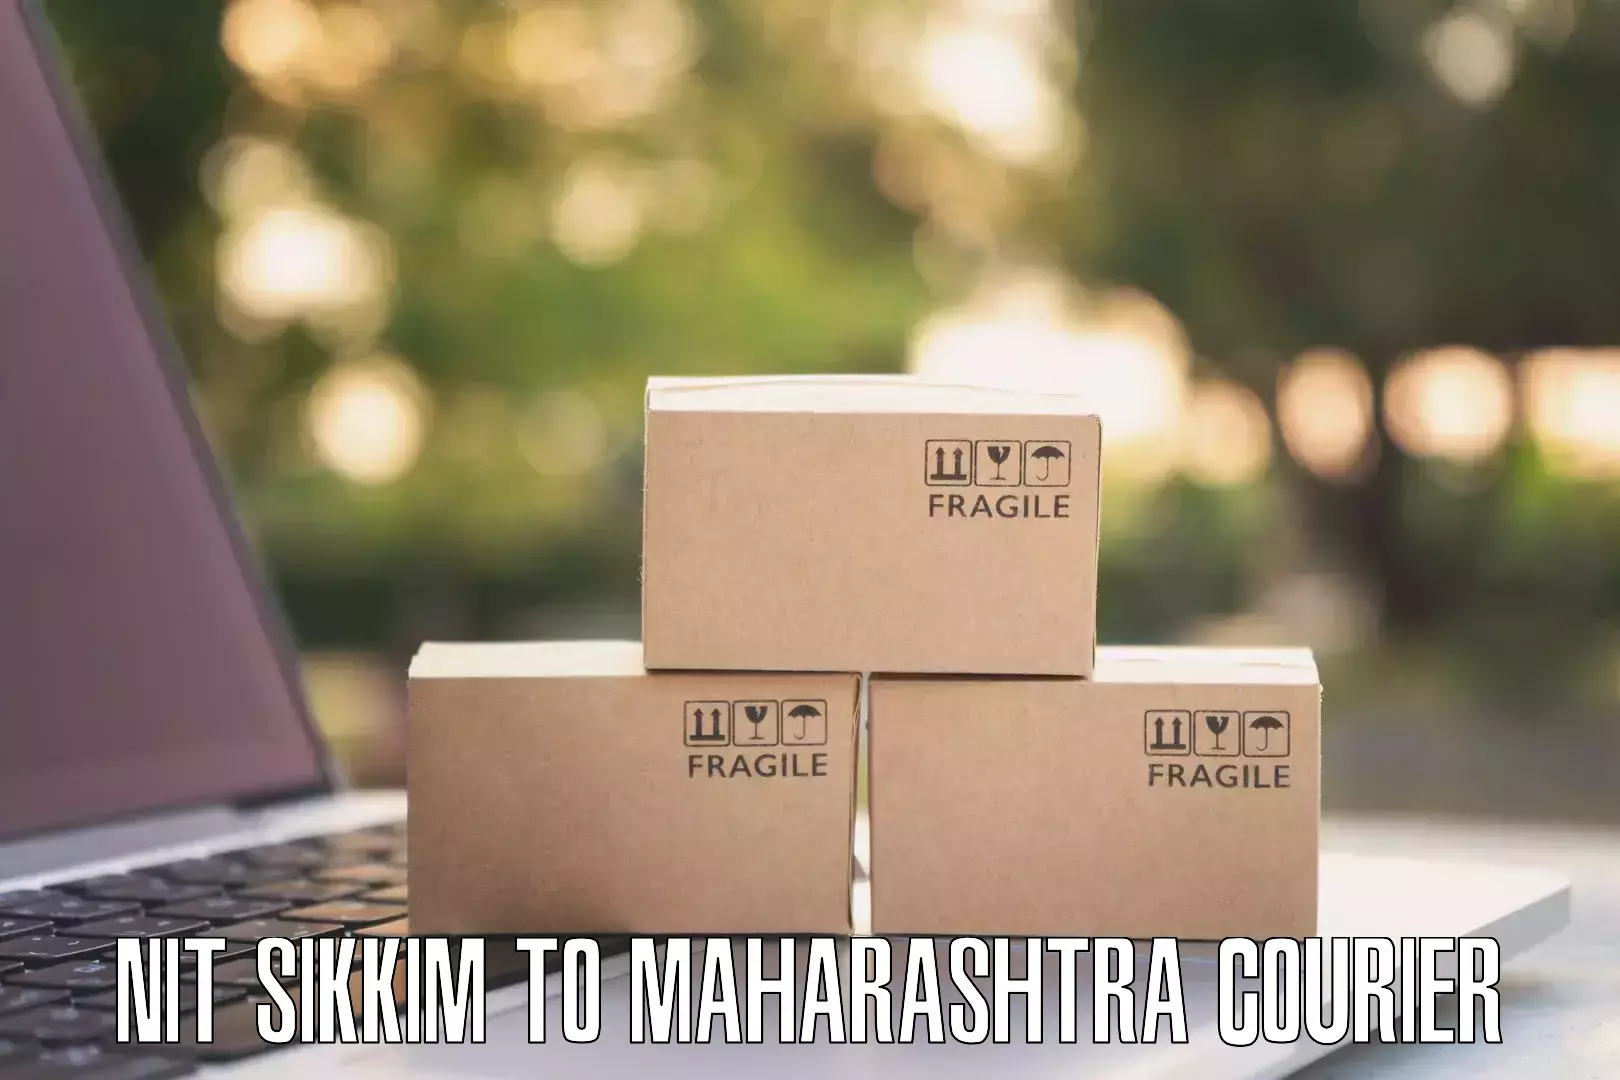 Global courier networks NIT Sikkim to Dharni Amravati